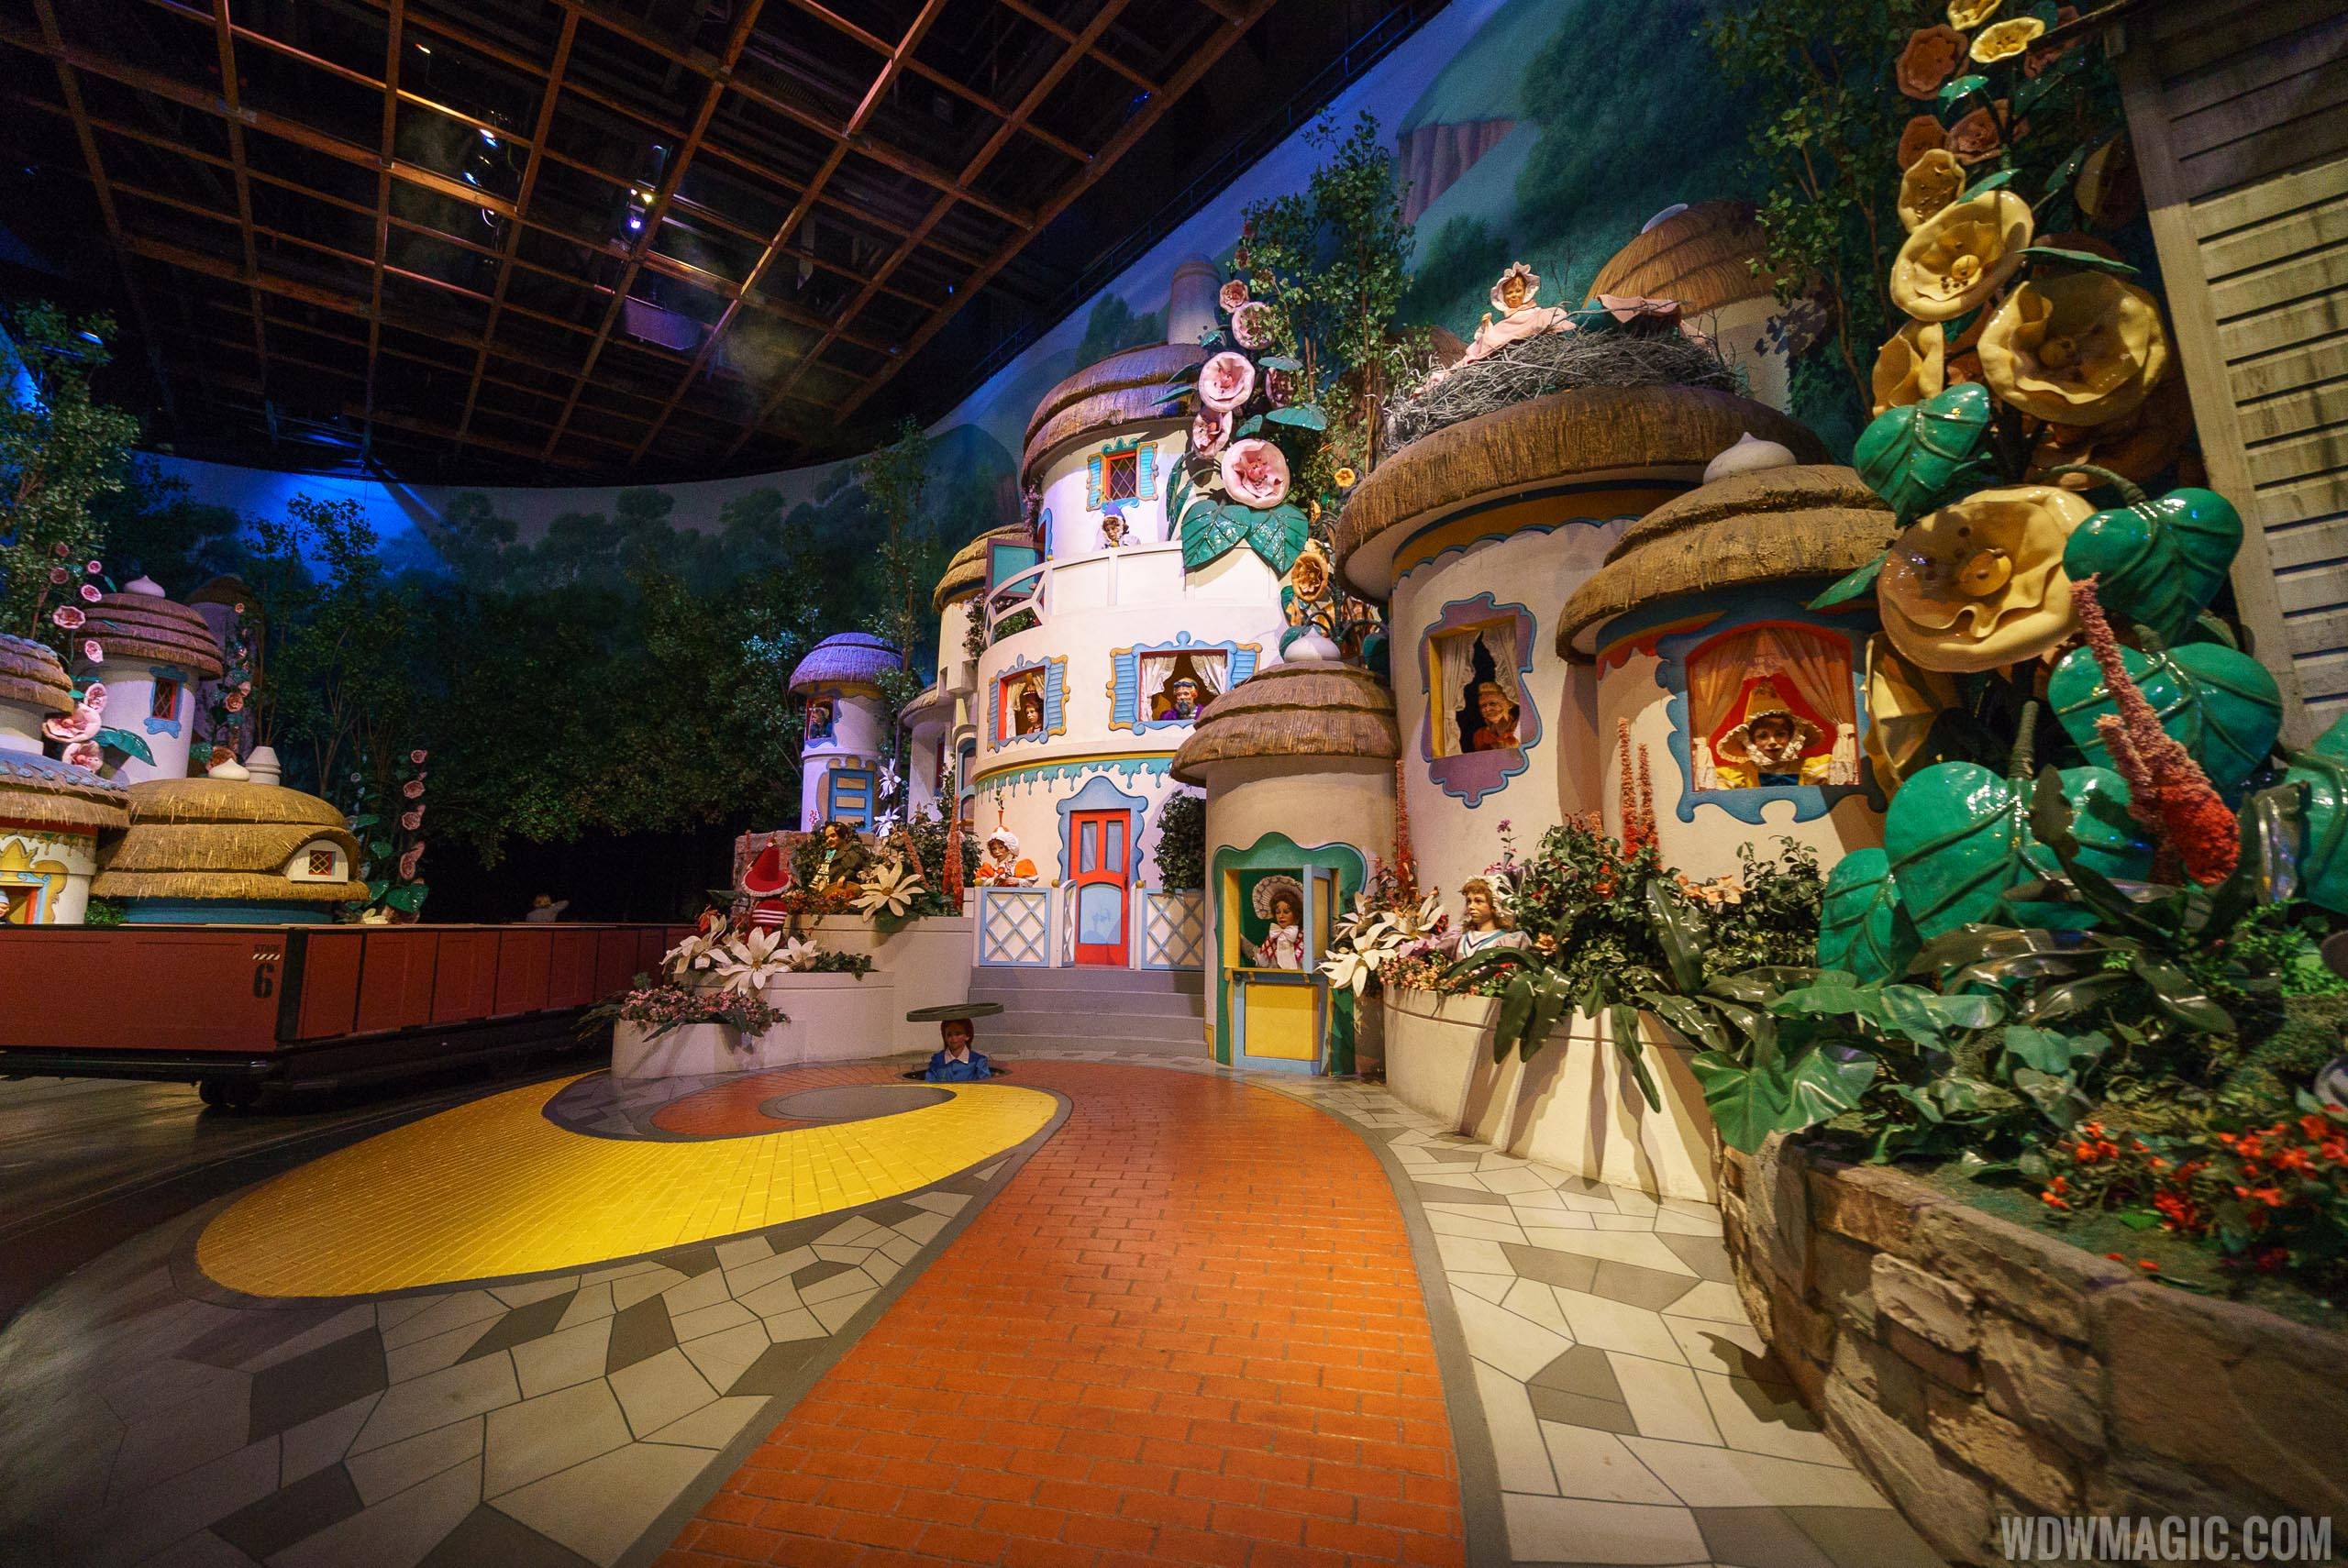 The Great Movie Ride - The Wizard of Oz scene